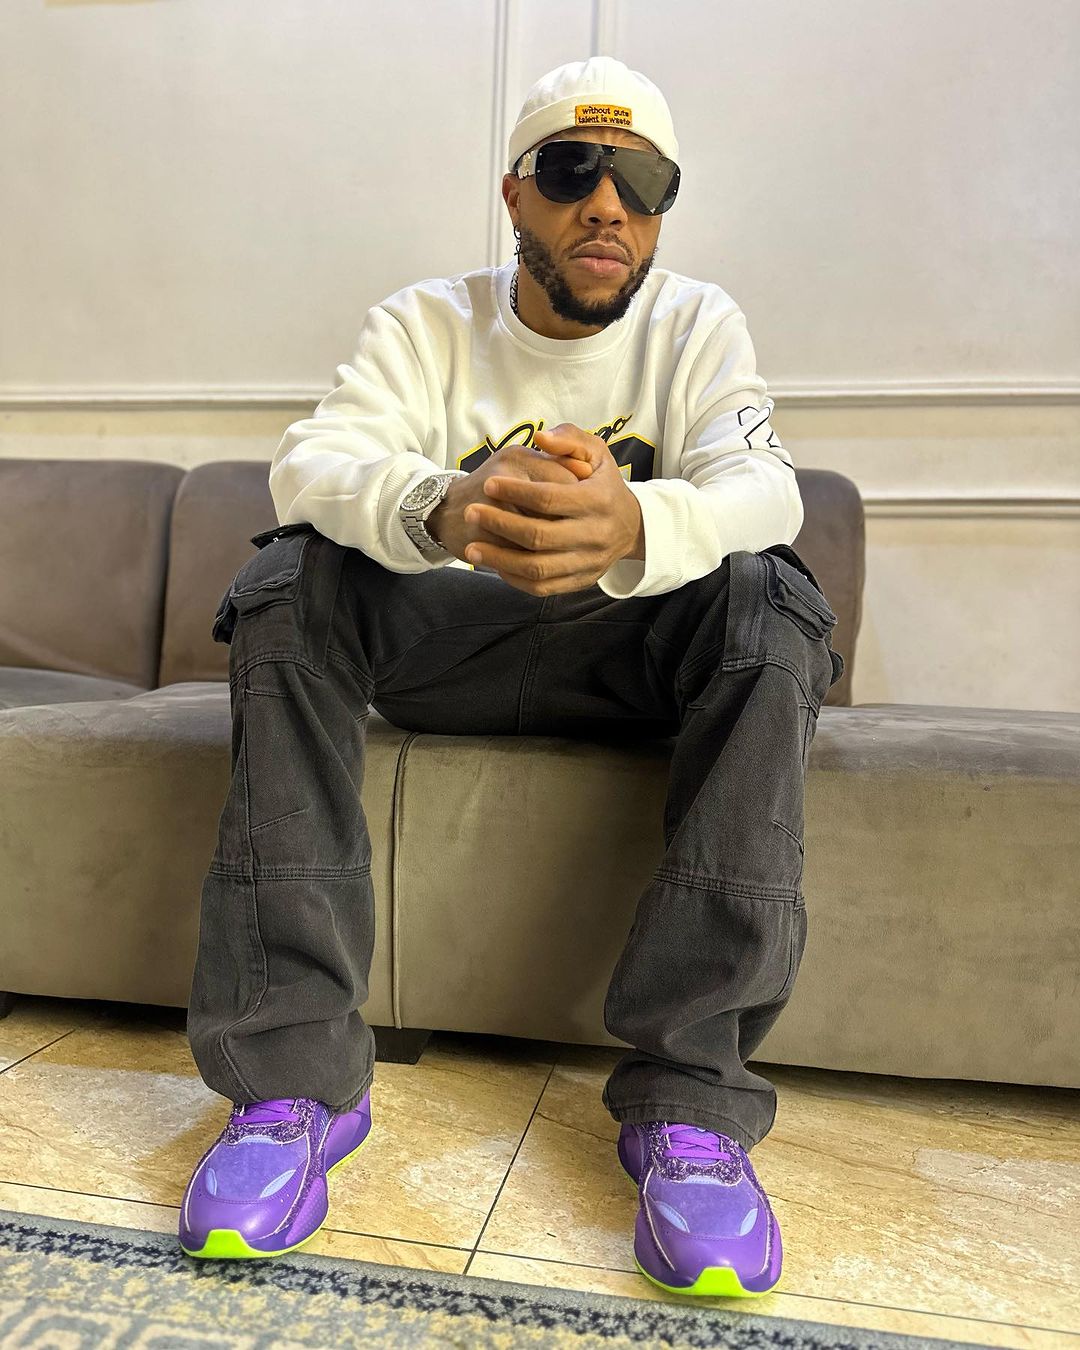 "Portable, keep my name out of your mouth; I'm a responsible man" – Charles Okocha blows hot as he clears air on alleged ripping